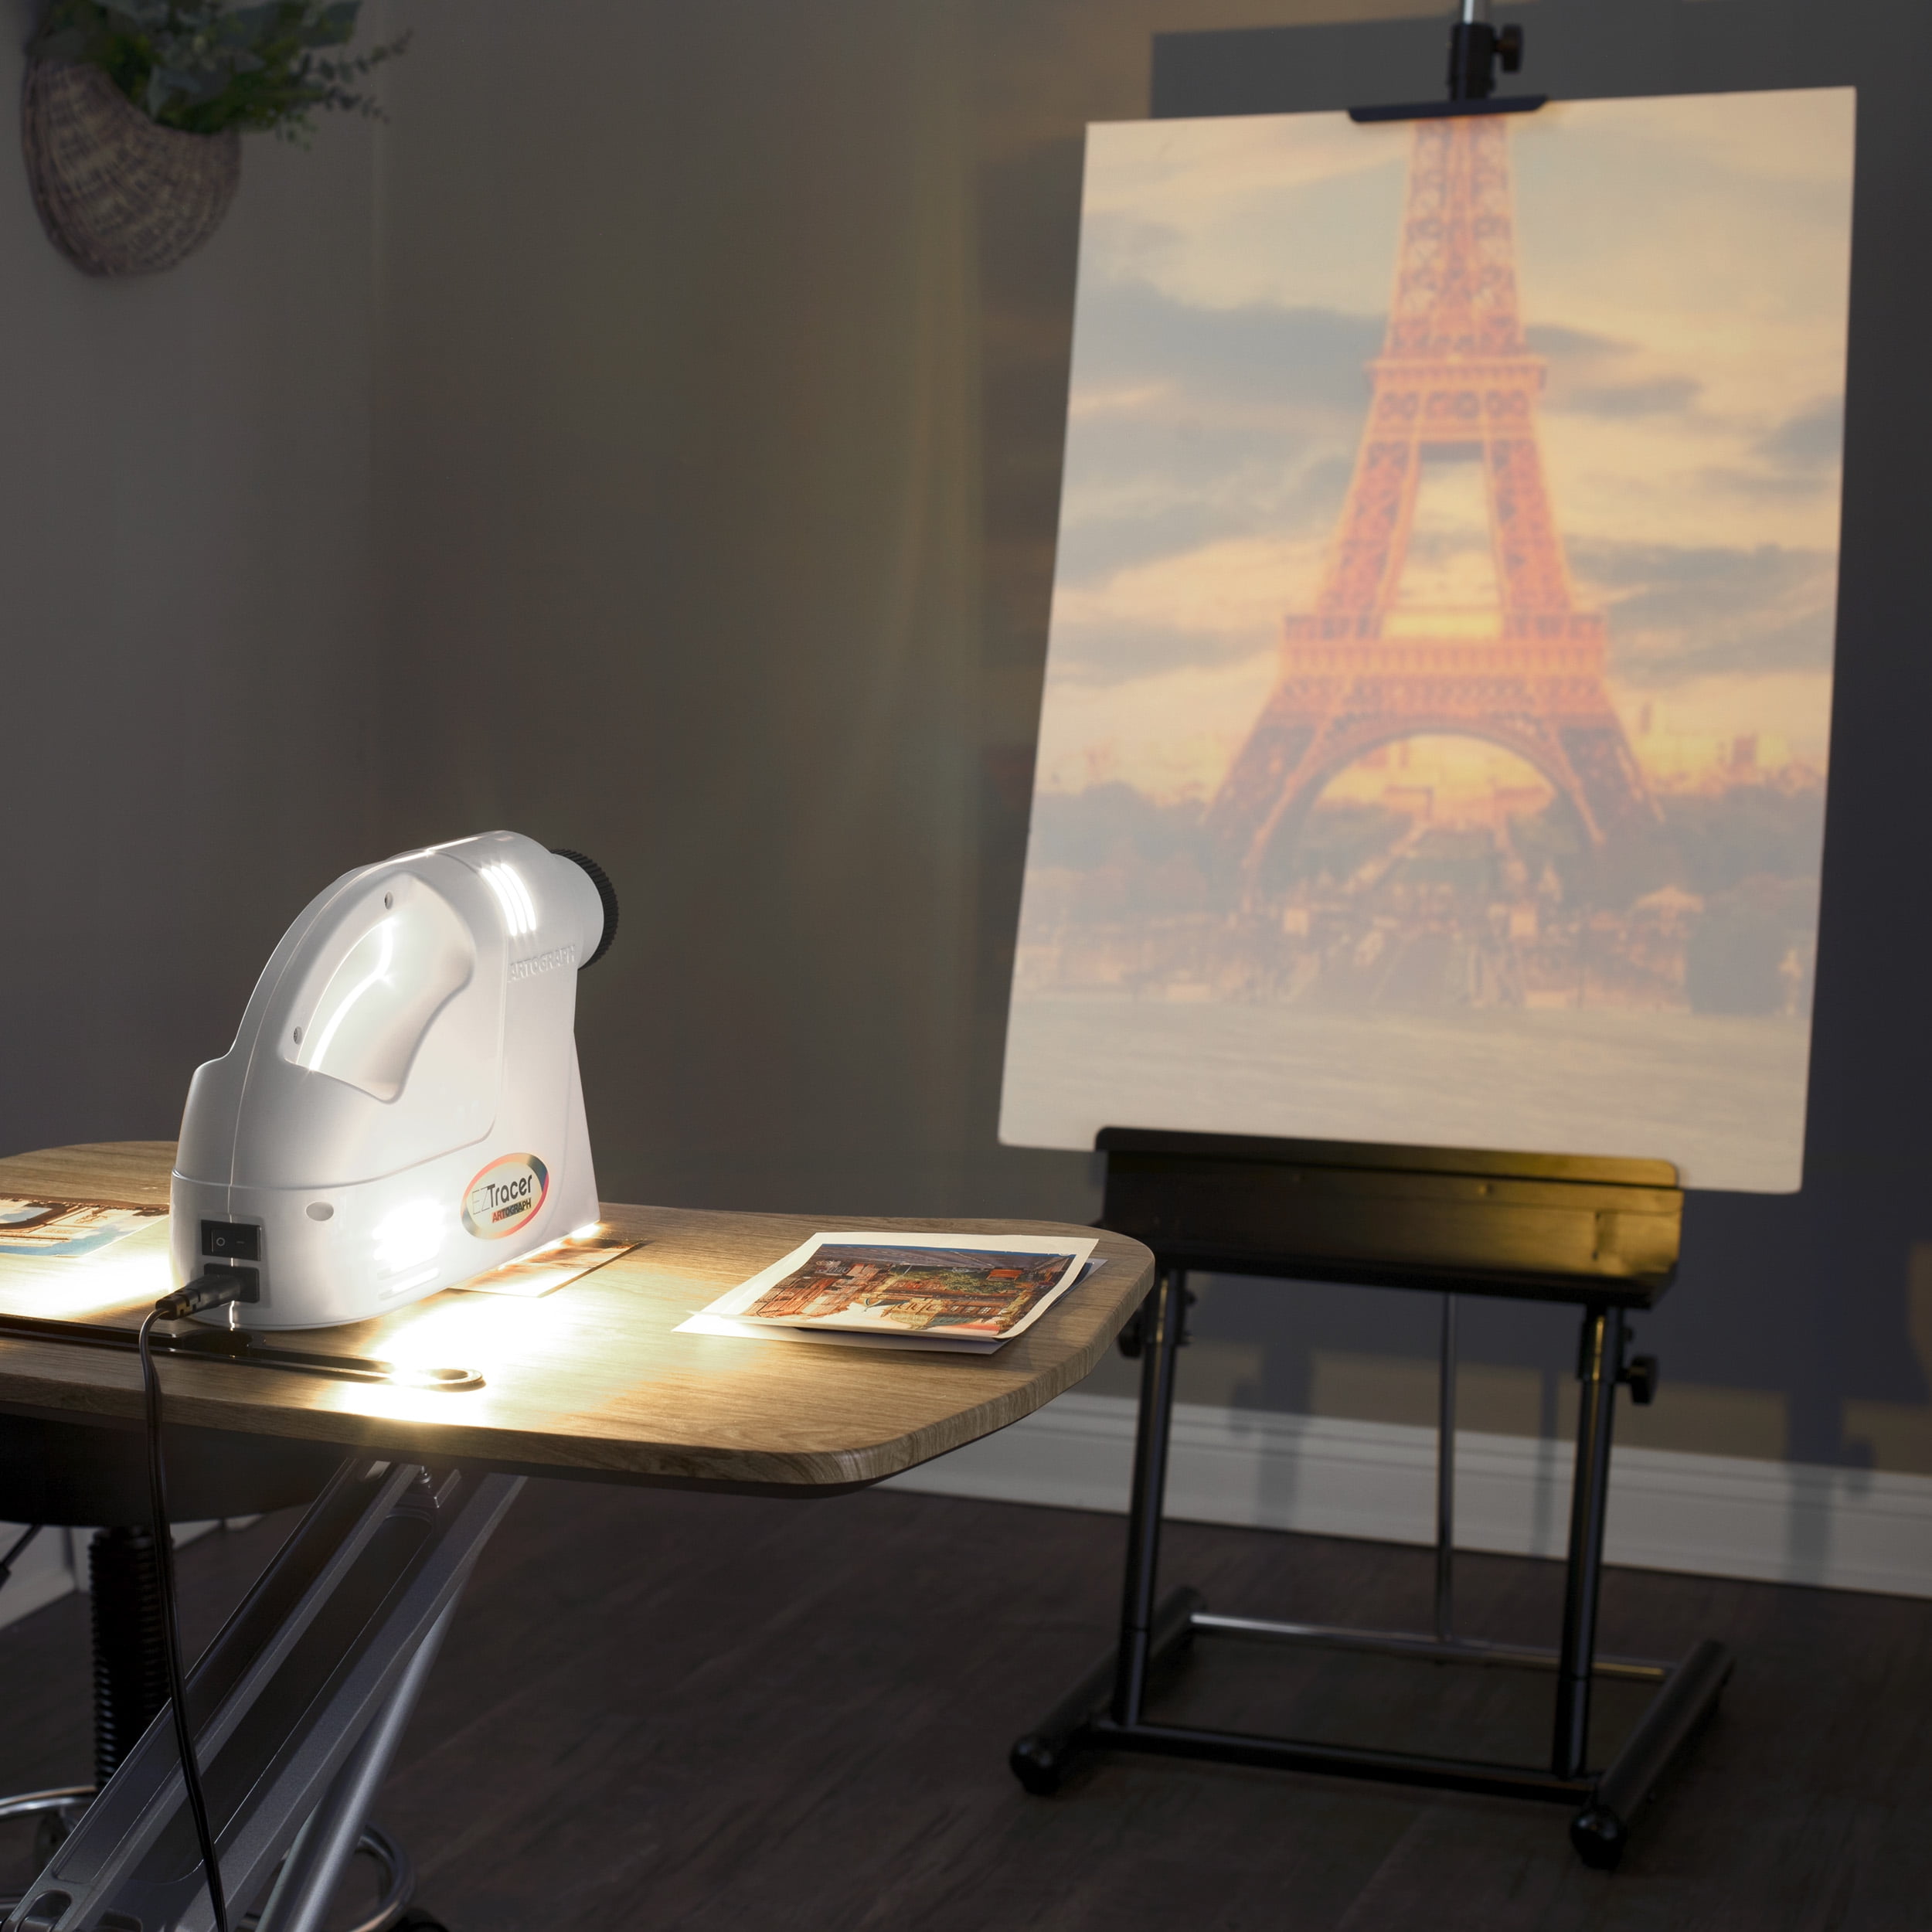 Artograph The Tracer Projector ~Enlarges Up To 10x Onto Vertical Surface  100 Watts Max